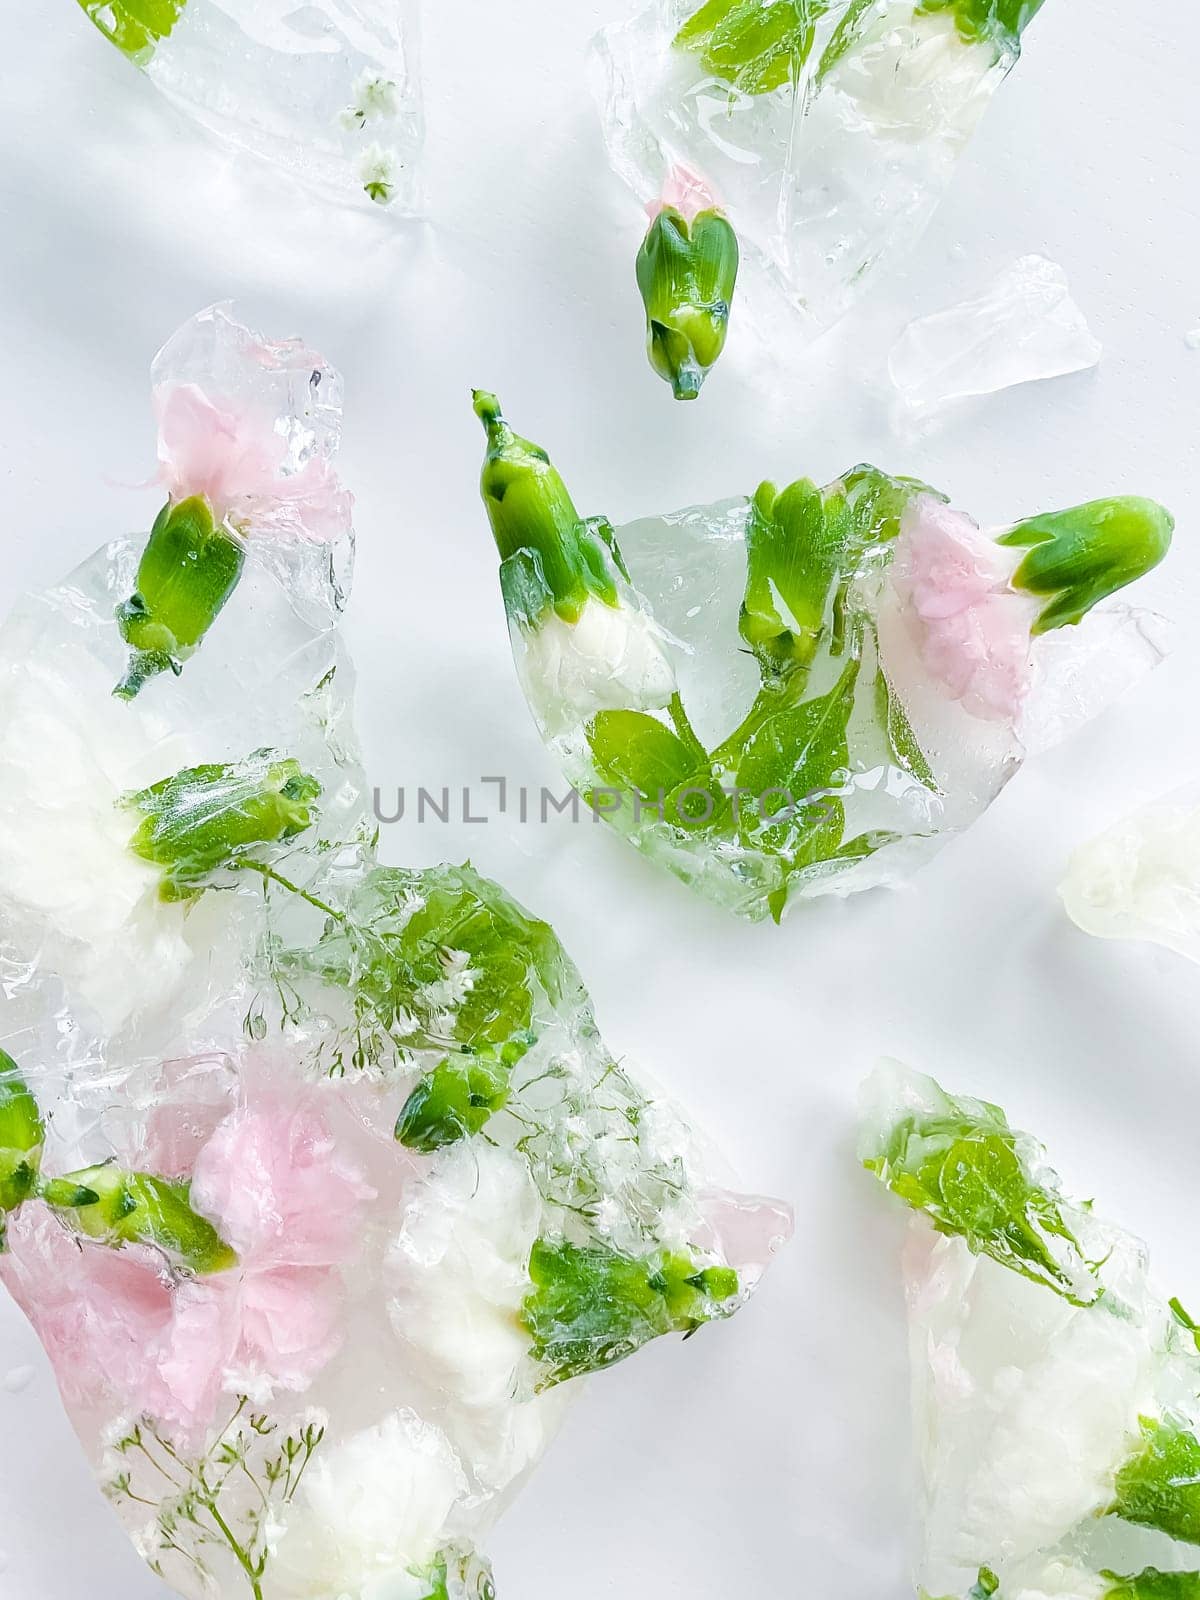 Pink and white carnations with ice pieces leaves lying on a white background. Floral ice cubes. broken ice